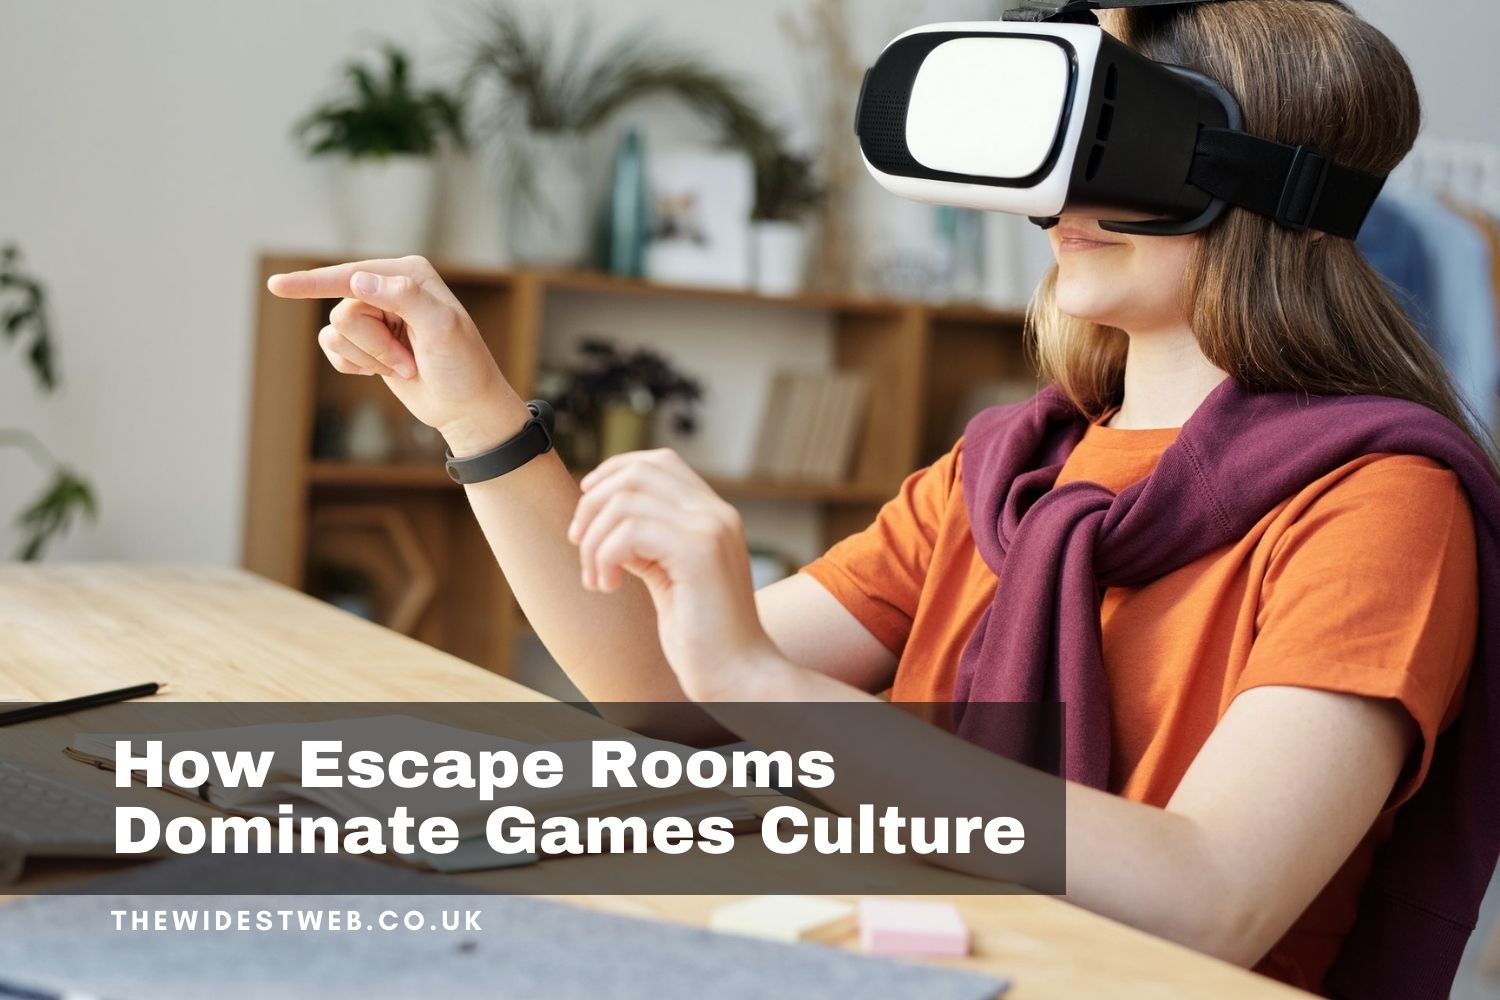 How Escape Rooms Came to Dominate Games Culture and Your Social Life?